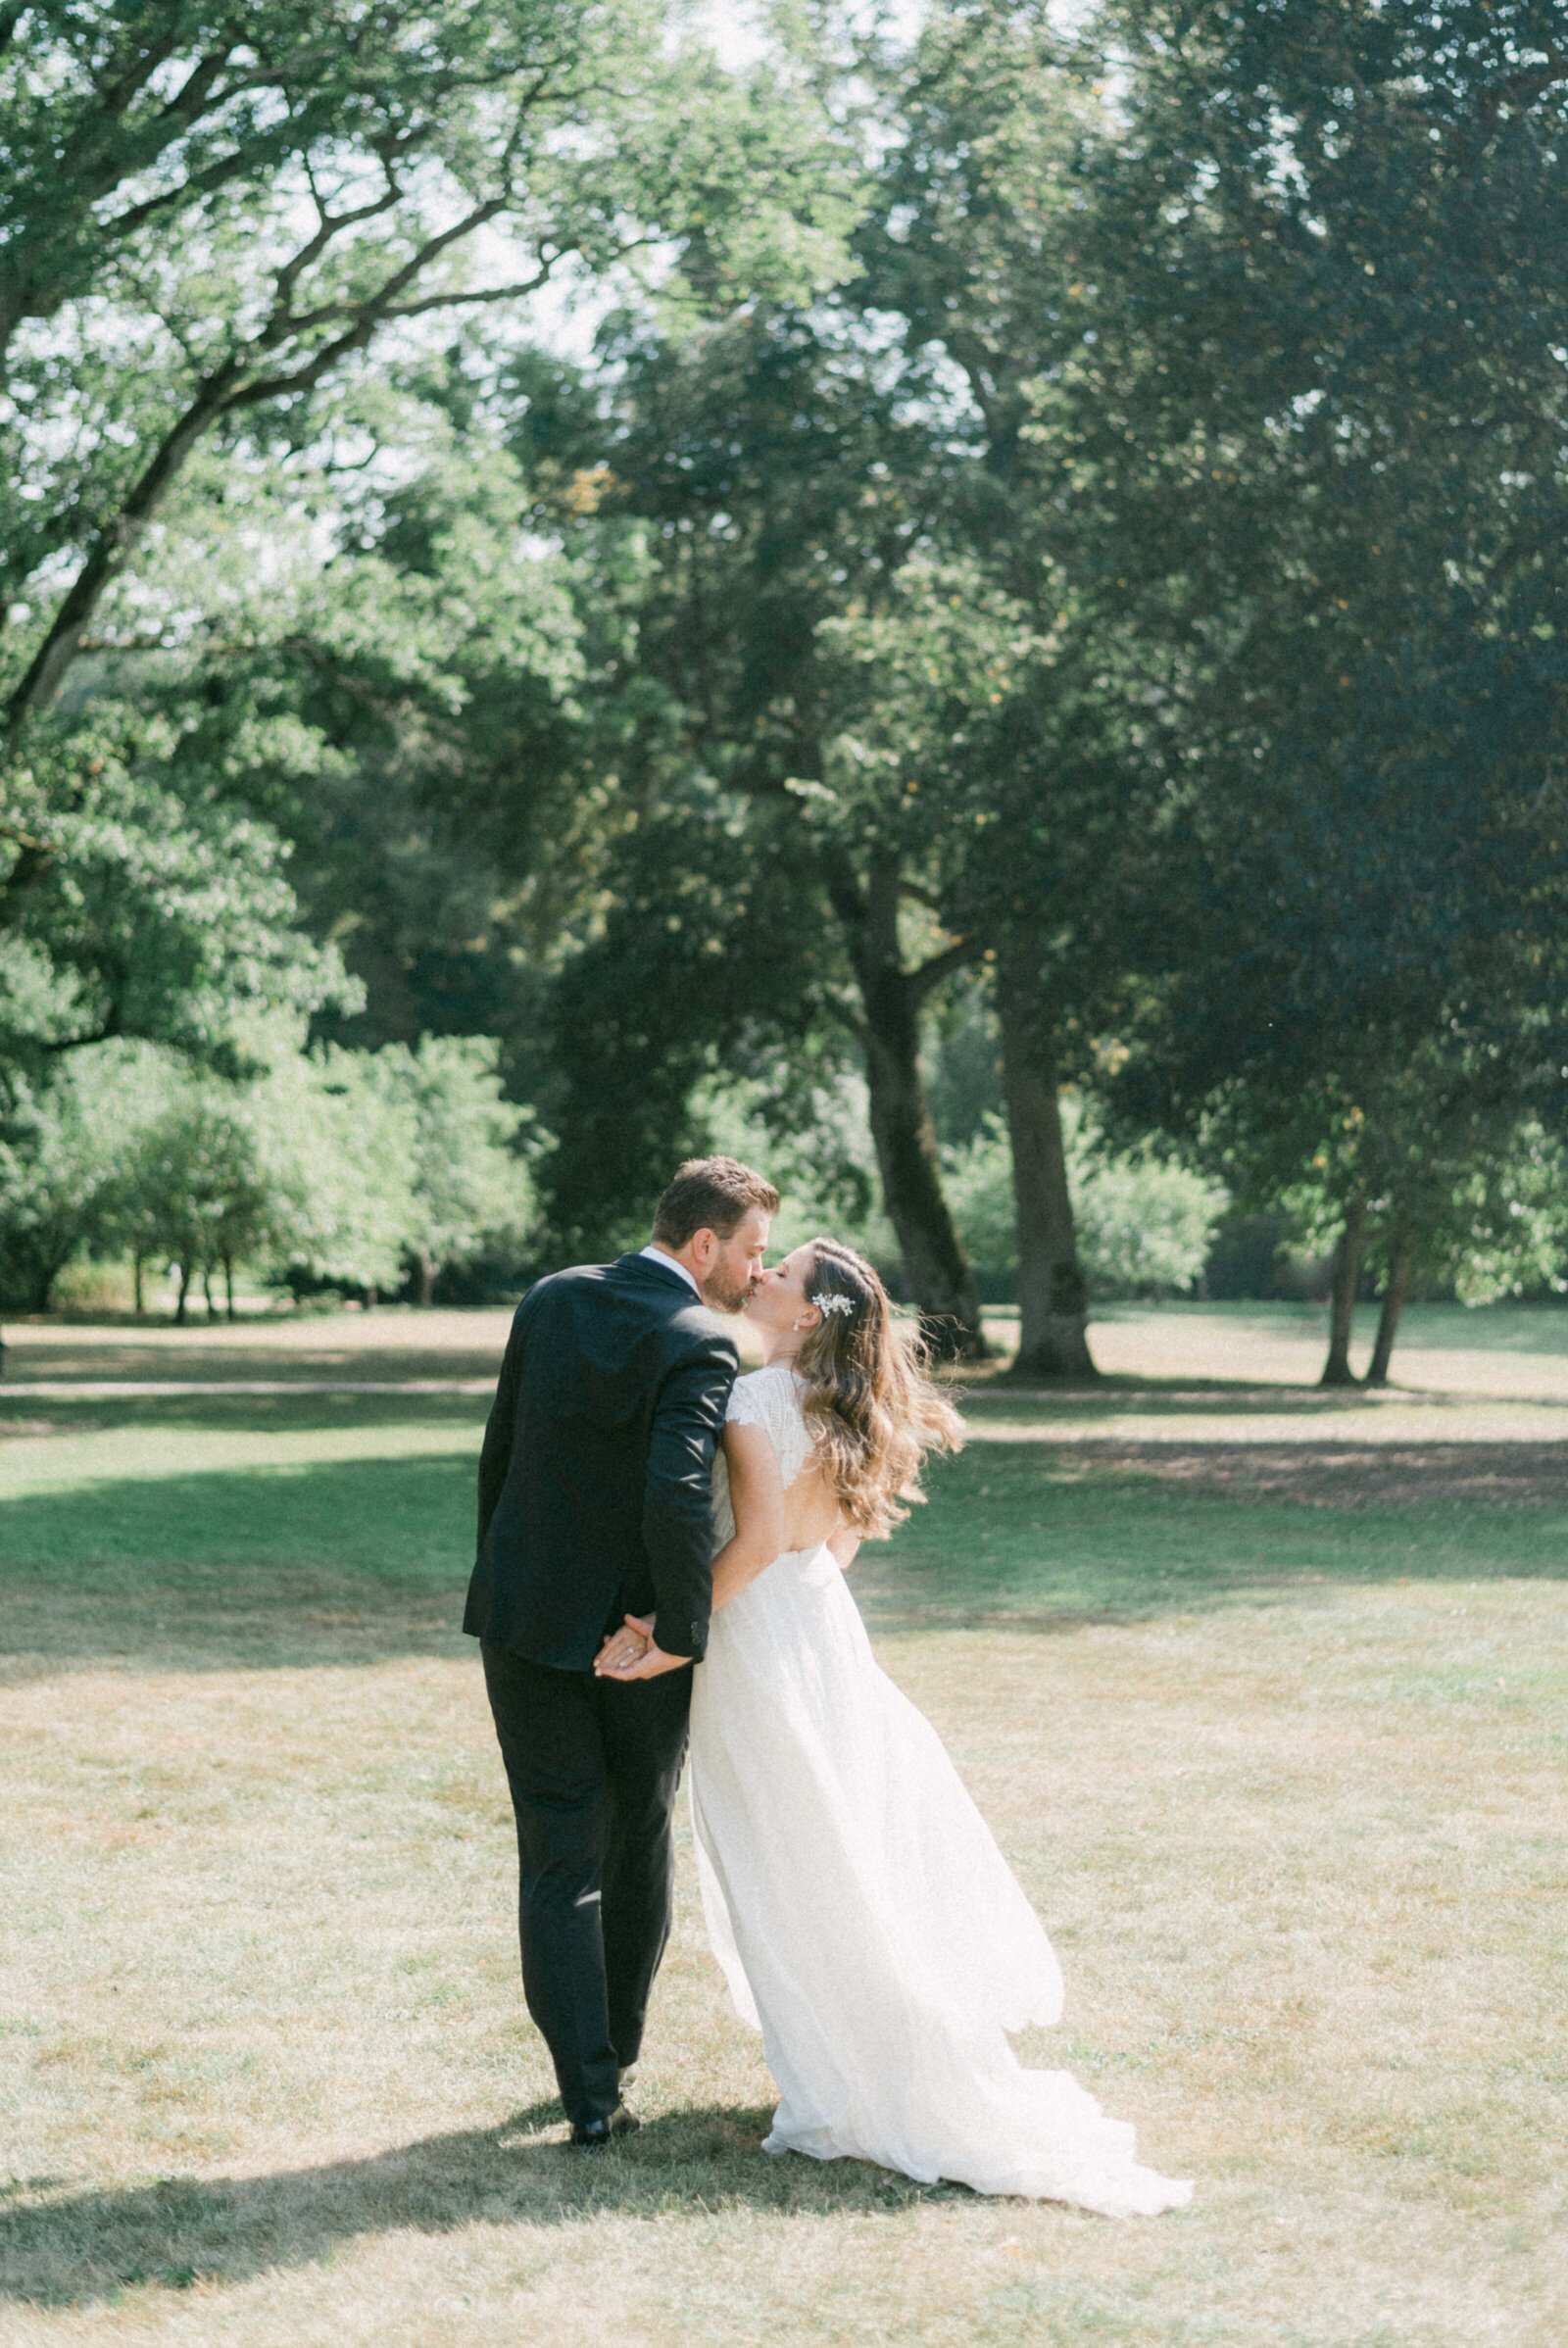 A wedding couple kissing and walking in a park in their wedding photography session with wedding photographer Hannika Gabrielsson.